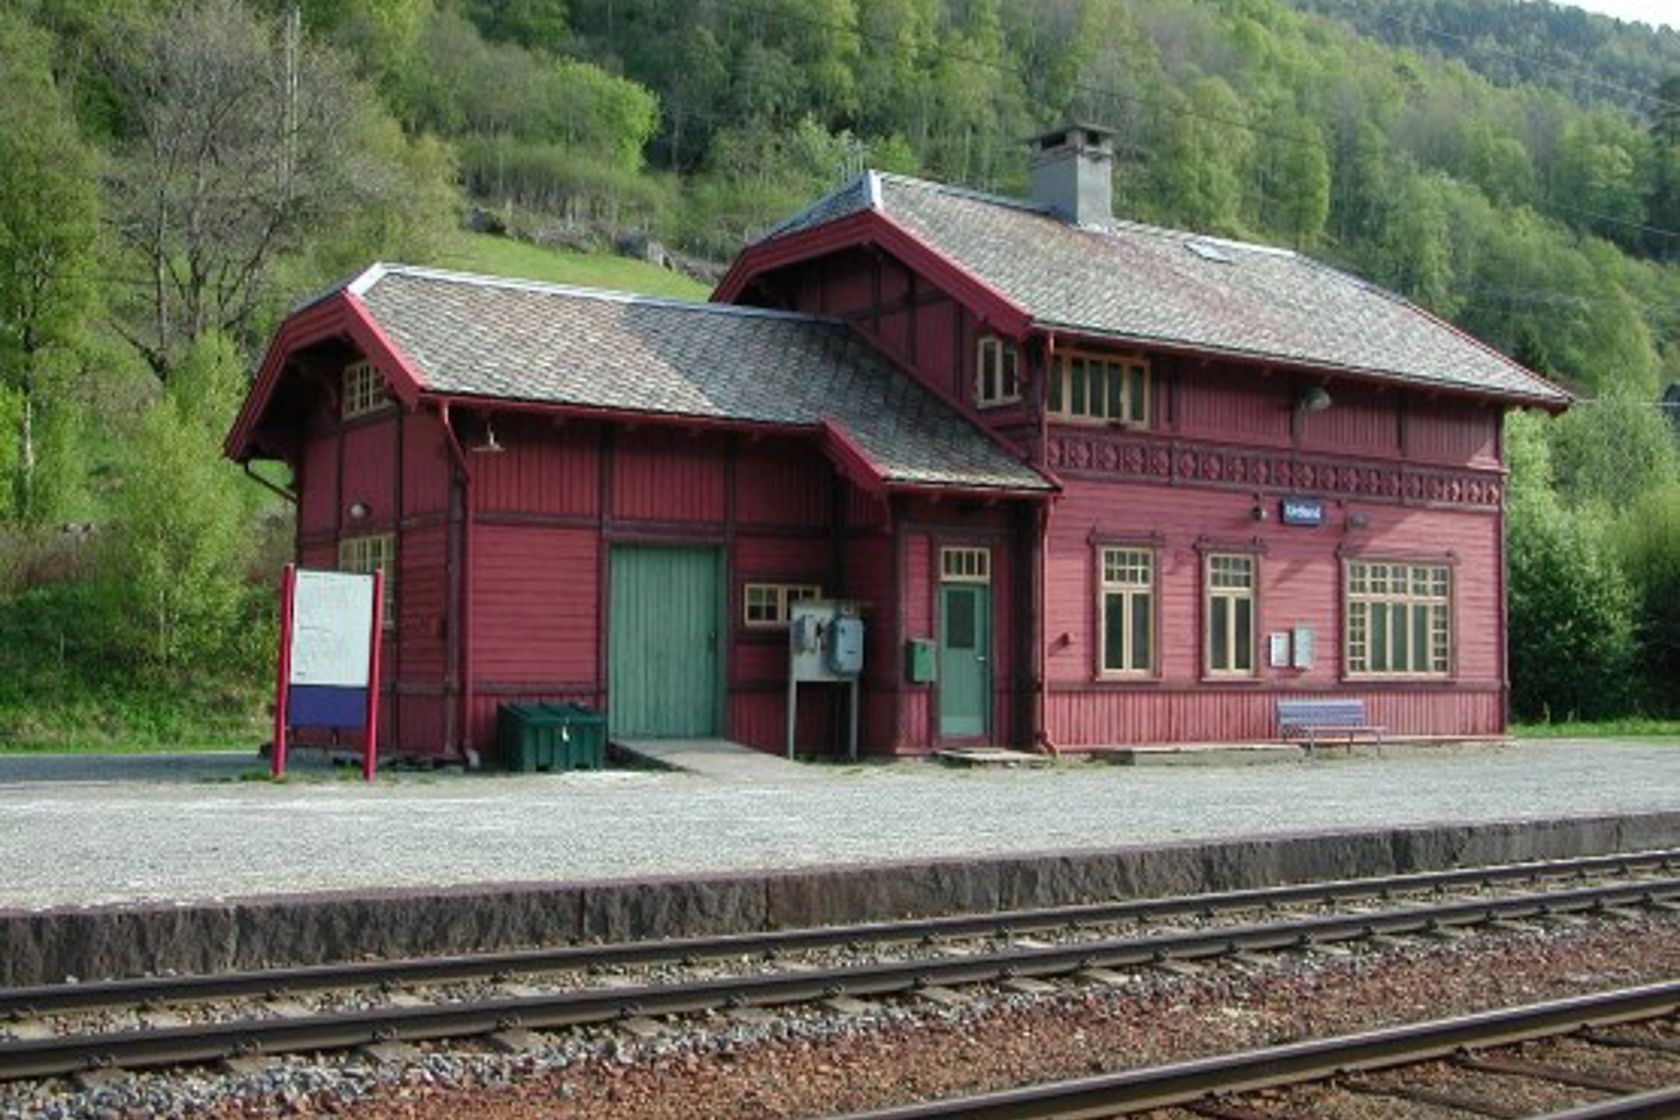 Exterior view of Urdland station